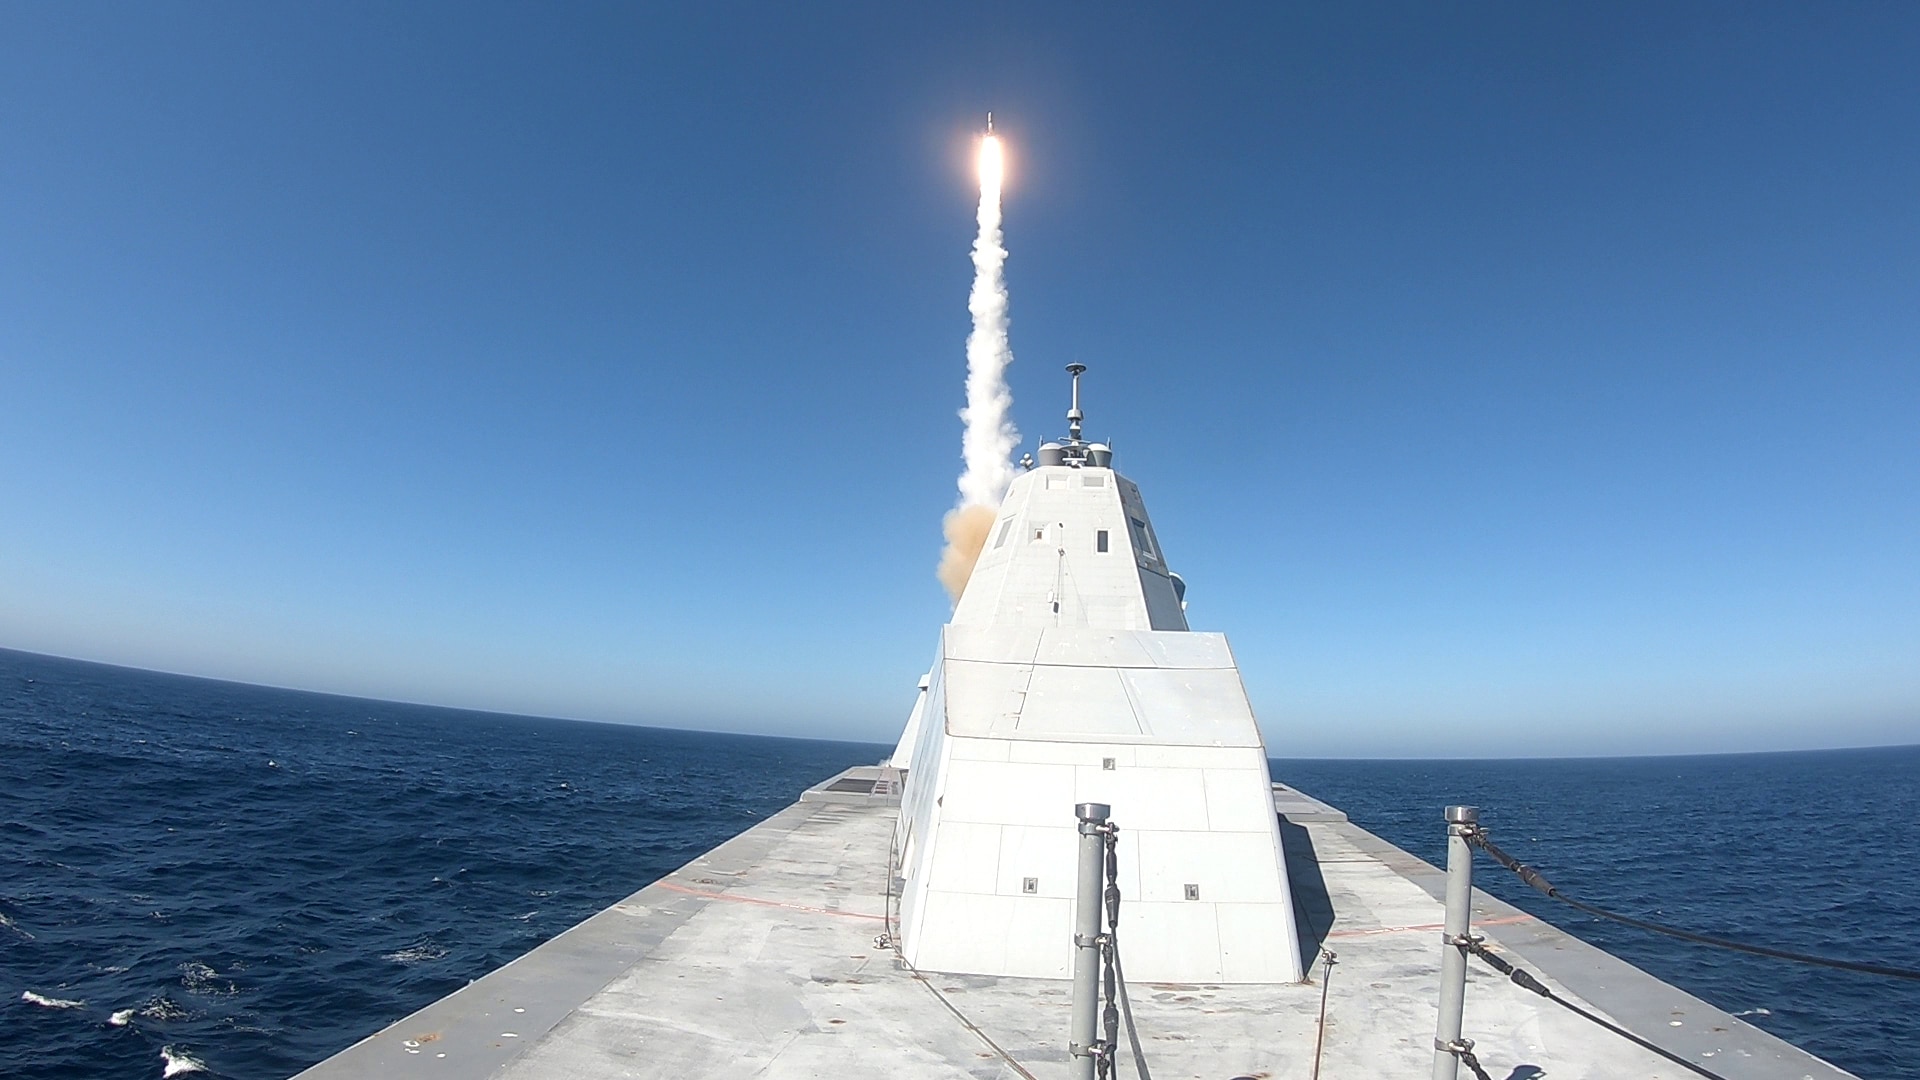 USS Zumwalt (DDG 1000) successfully executed the first live fire test of the MK 57 Vertical Launching System with a Standard Missile (SM-2)